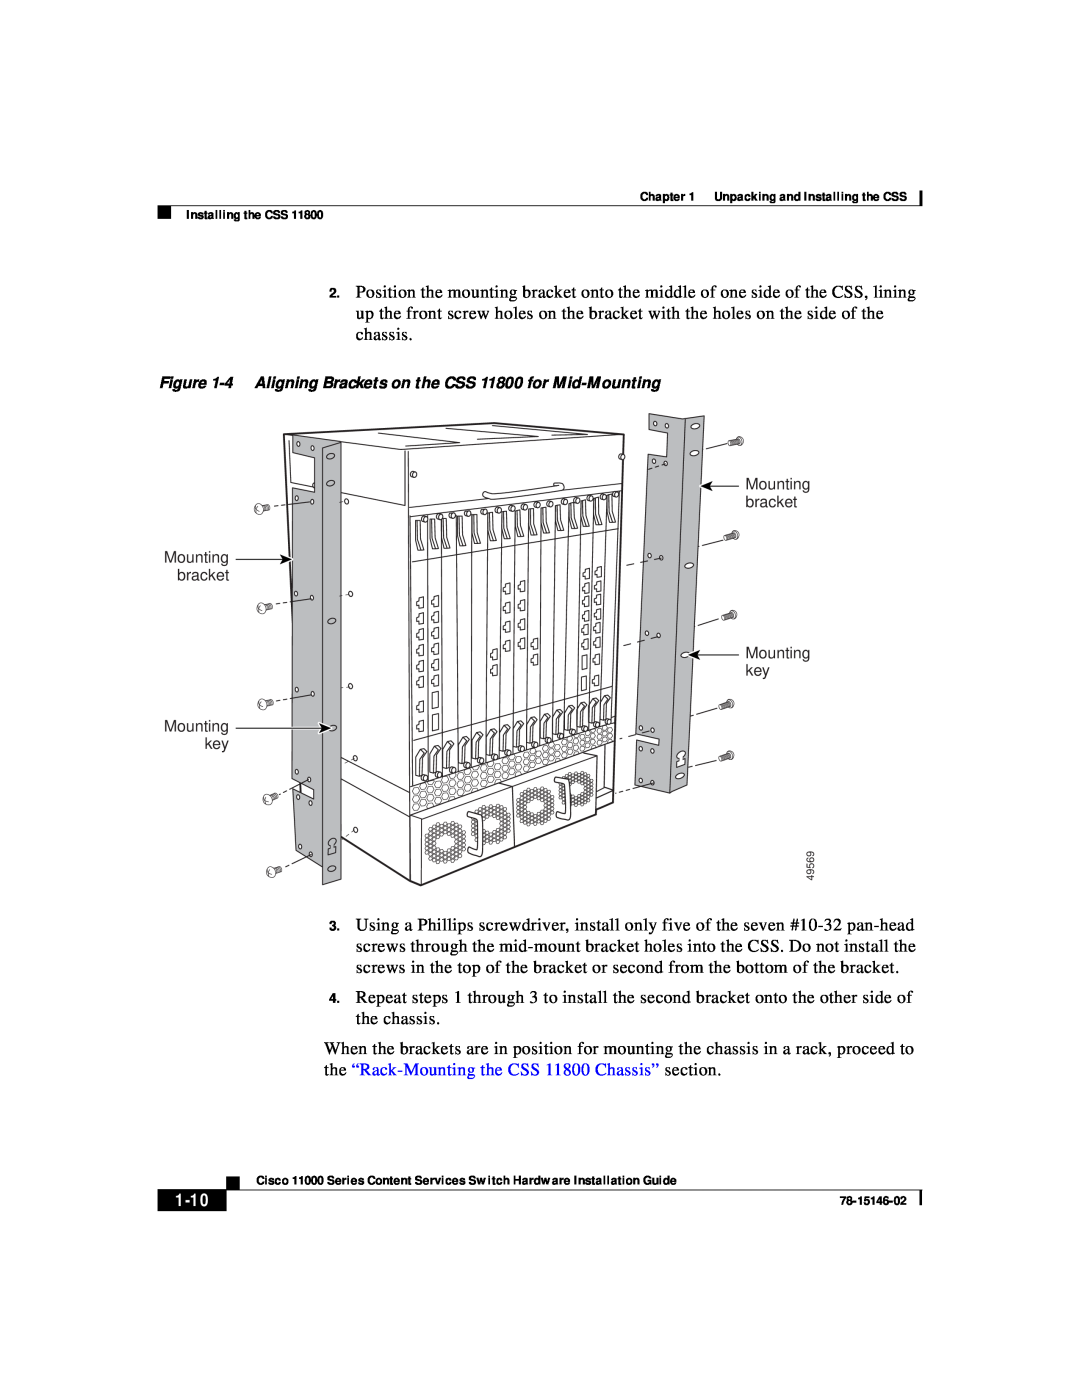 Cisco Systems 11000 Series manual 1-10, 4 Aligning Brackets on the CSS 11800 for Mid-Mounting 